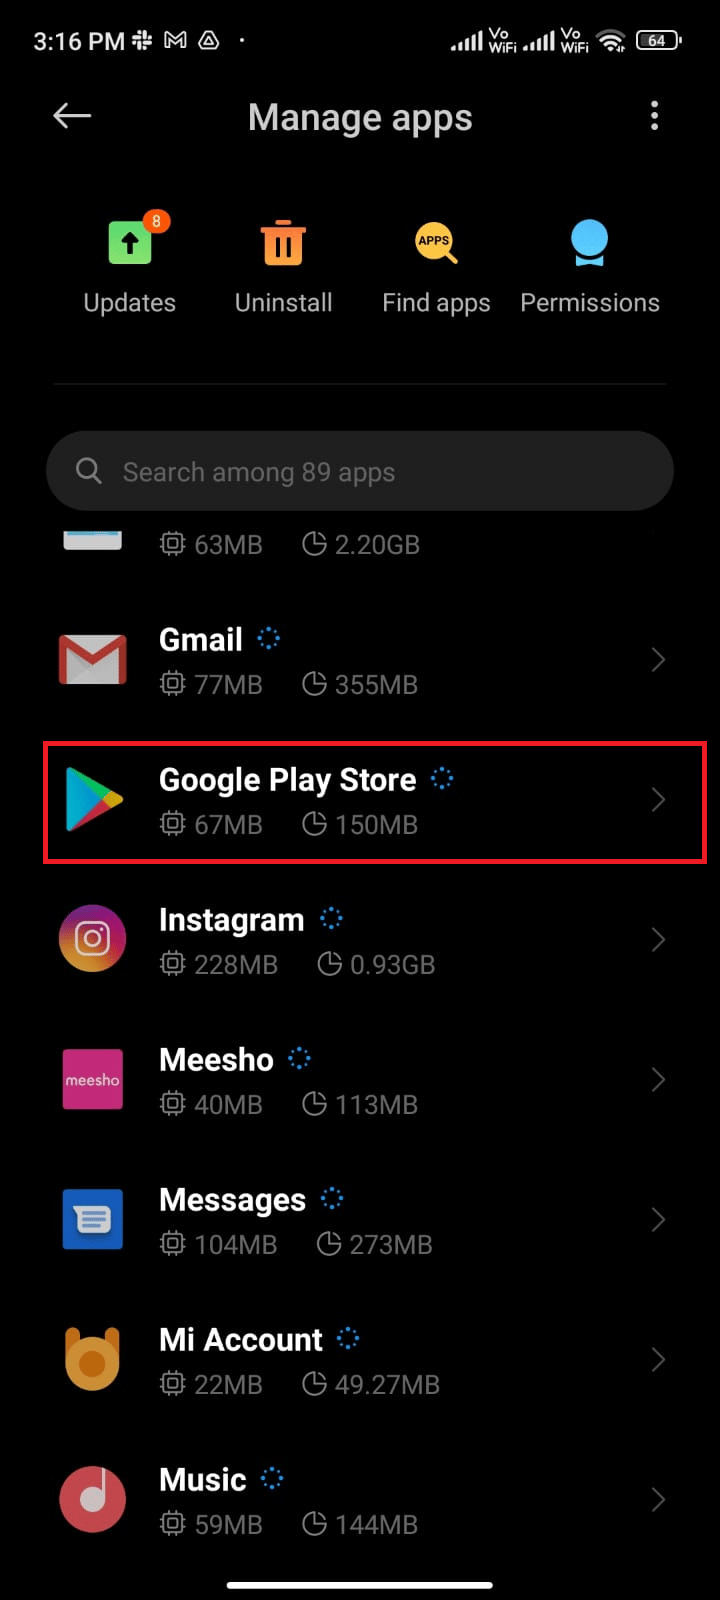 tap on Manage apps followed by Google Play Store